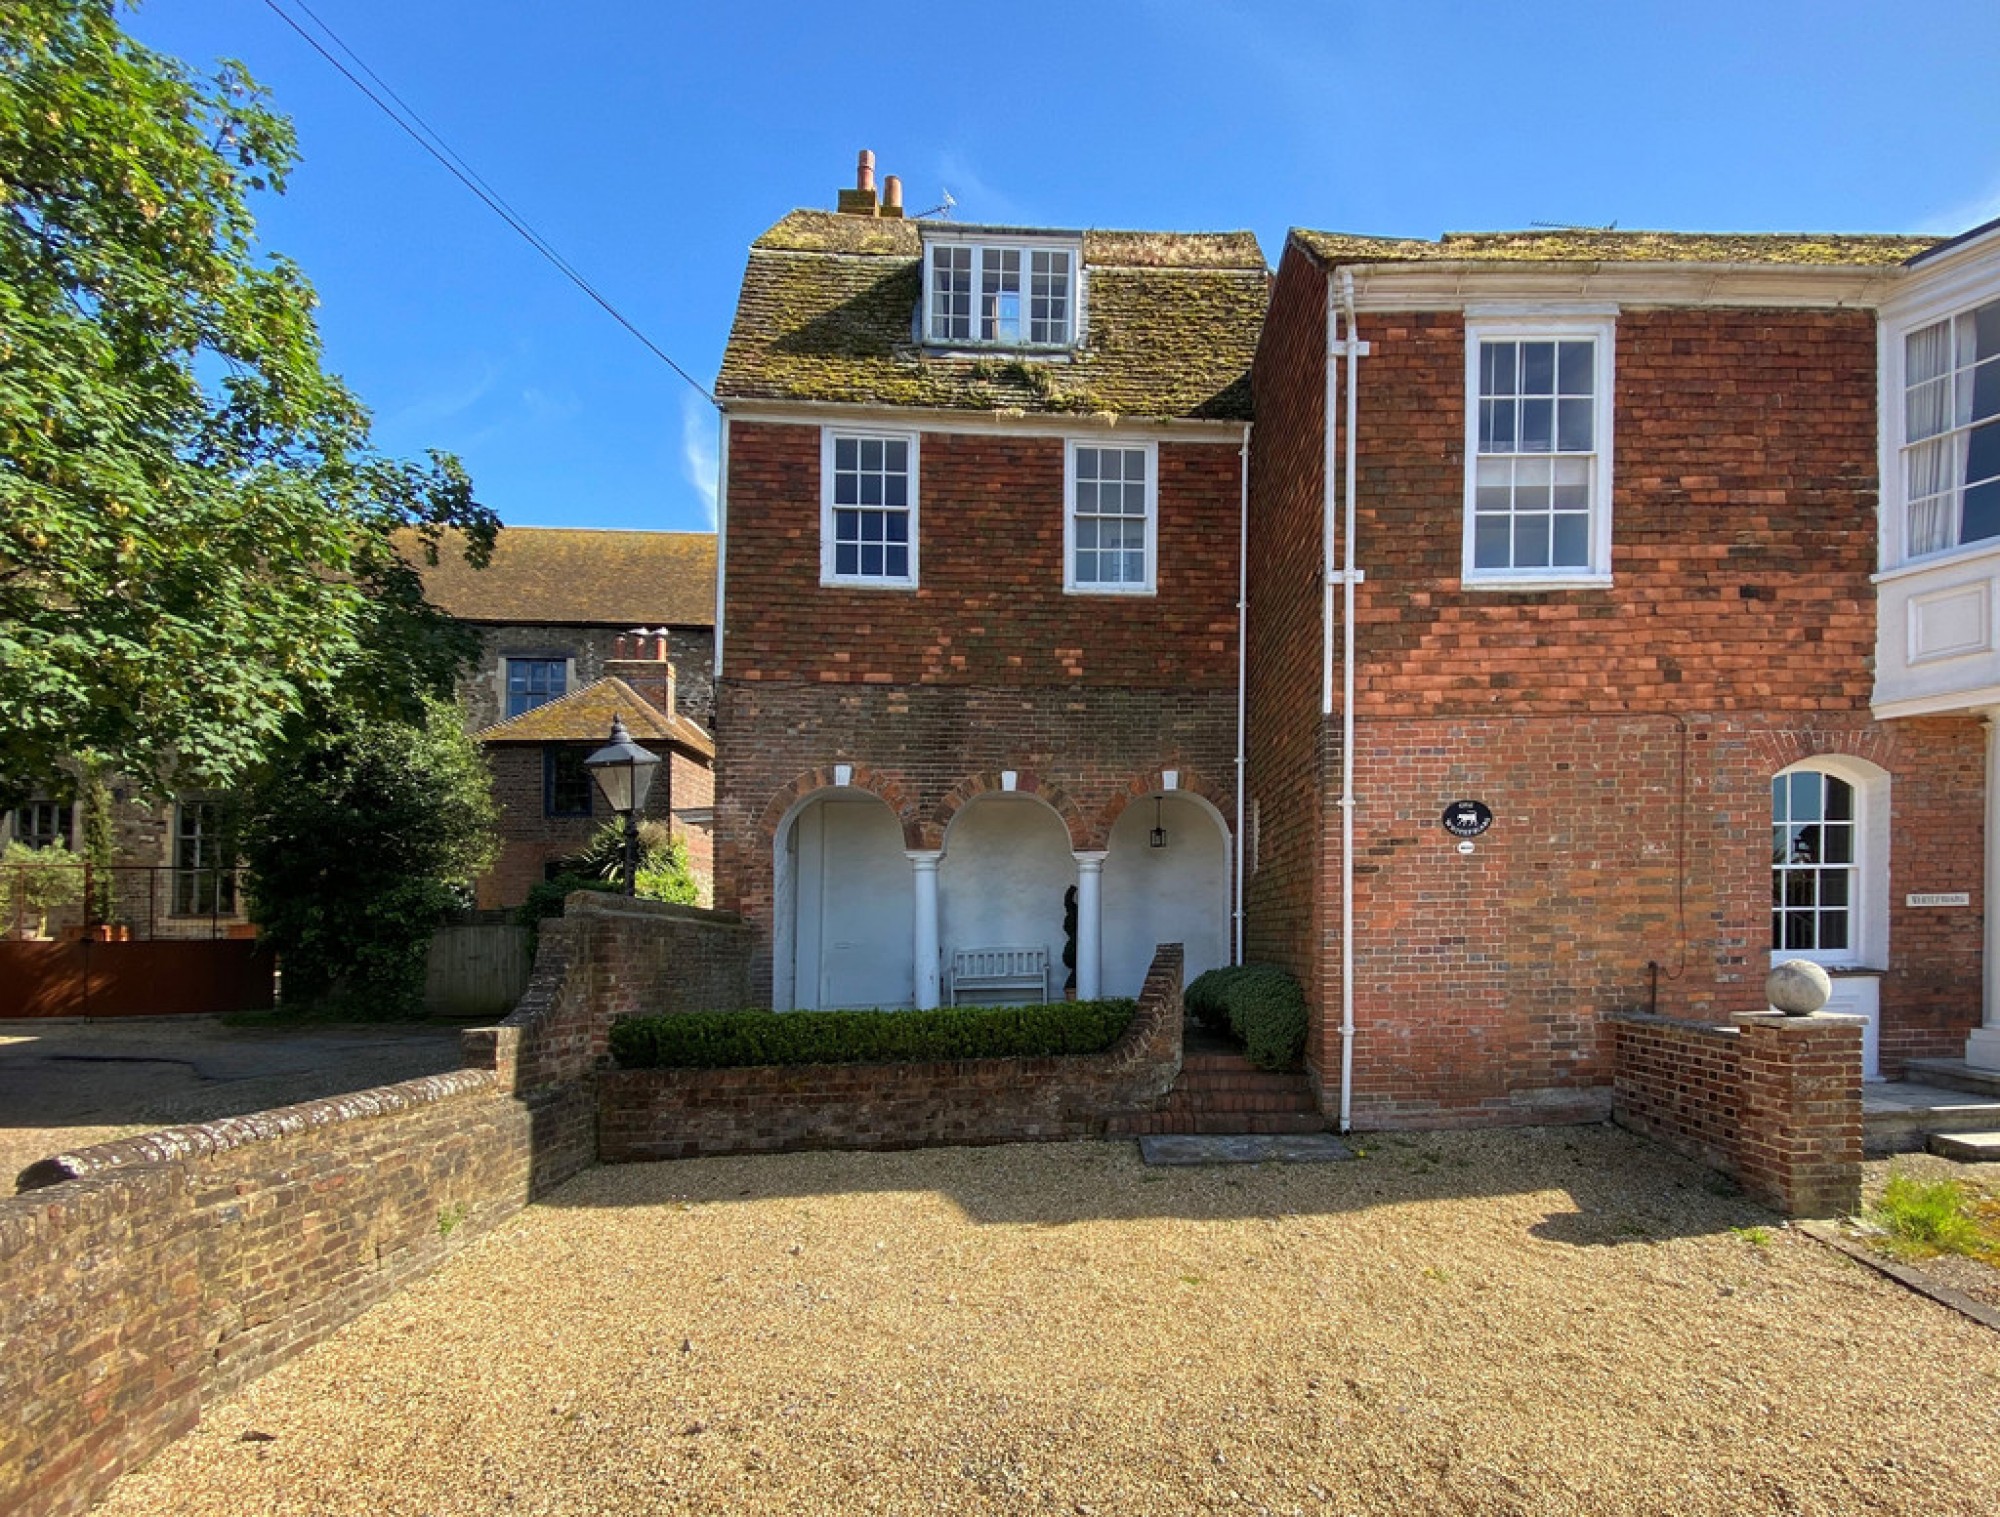 Images for Conduit Hill, Rye, East Sussex TN31 7LE